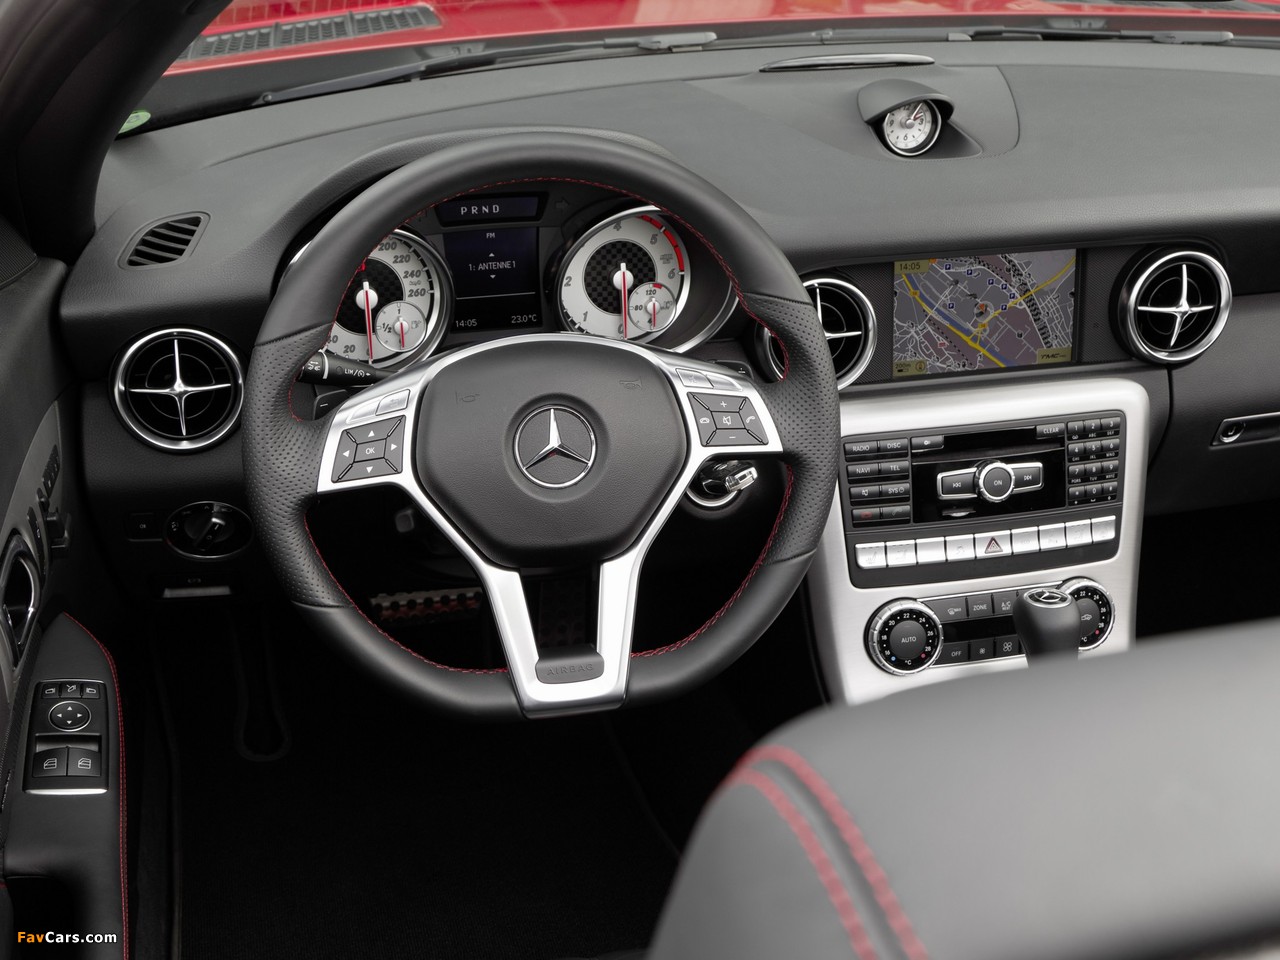 Mercedes-Benz SLK 250 CDI AMG Sports Package (R172) 2011 images (1280 x 960)